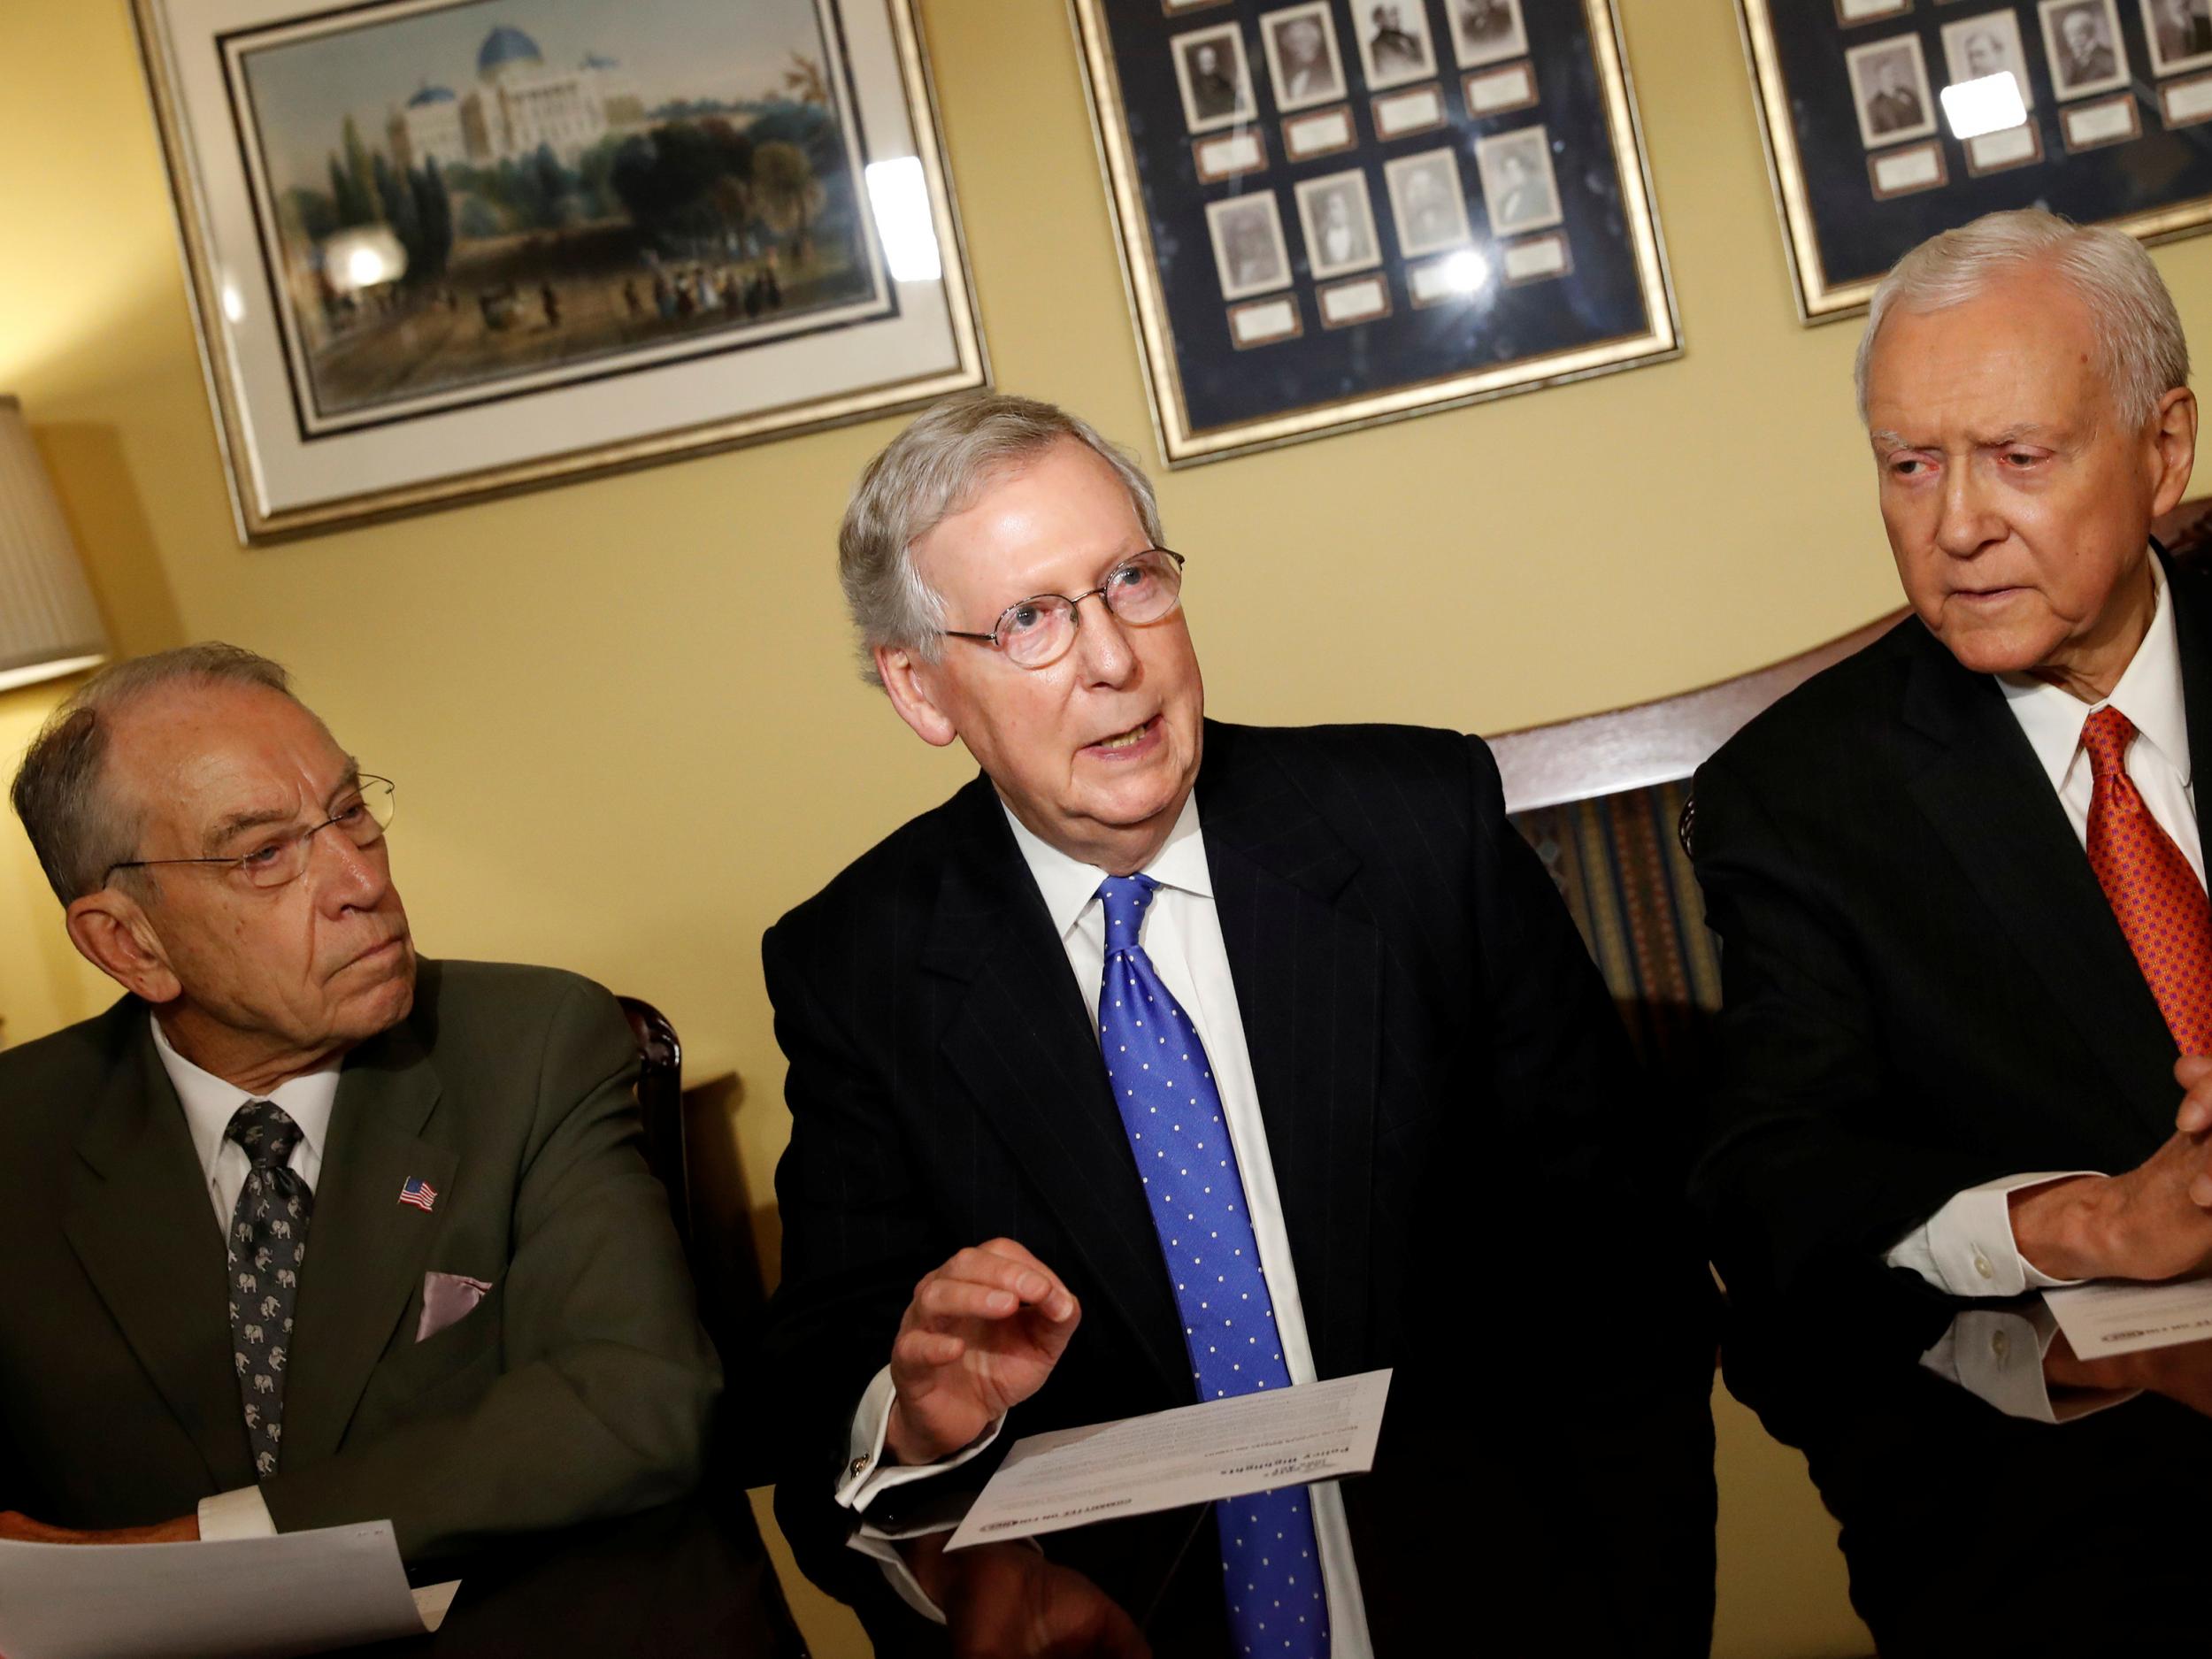 Senators Chuck Grassley (left) and Orrin Hatch (right) with Senate Majority Leader Mitch McConnell introducing the Republican tax reform plan at the US Capitol in Washington